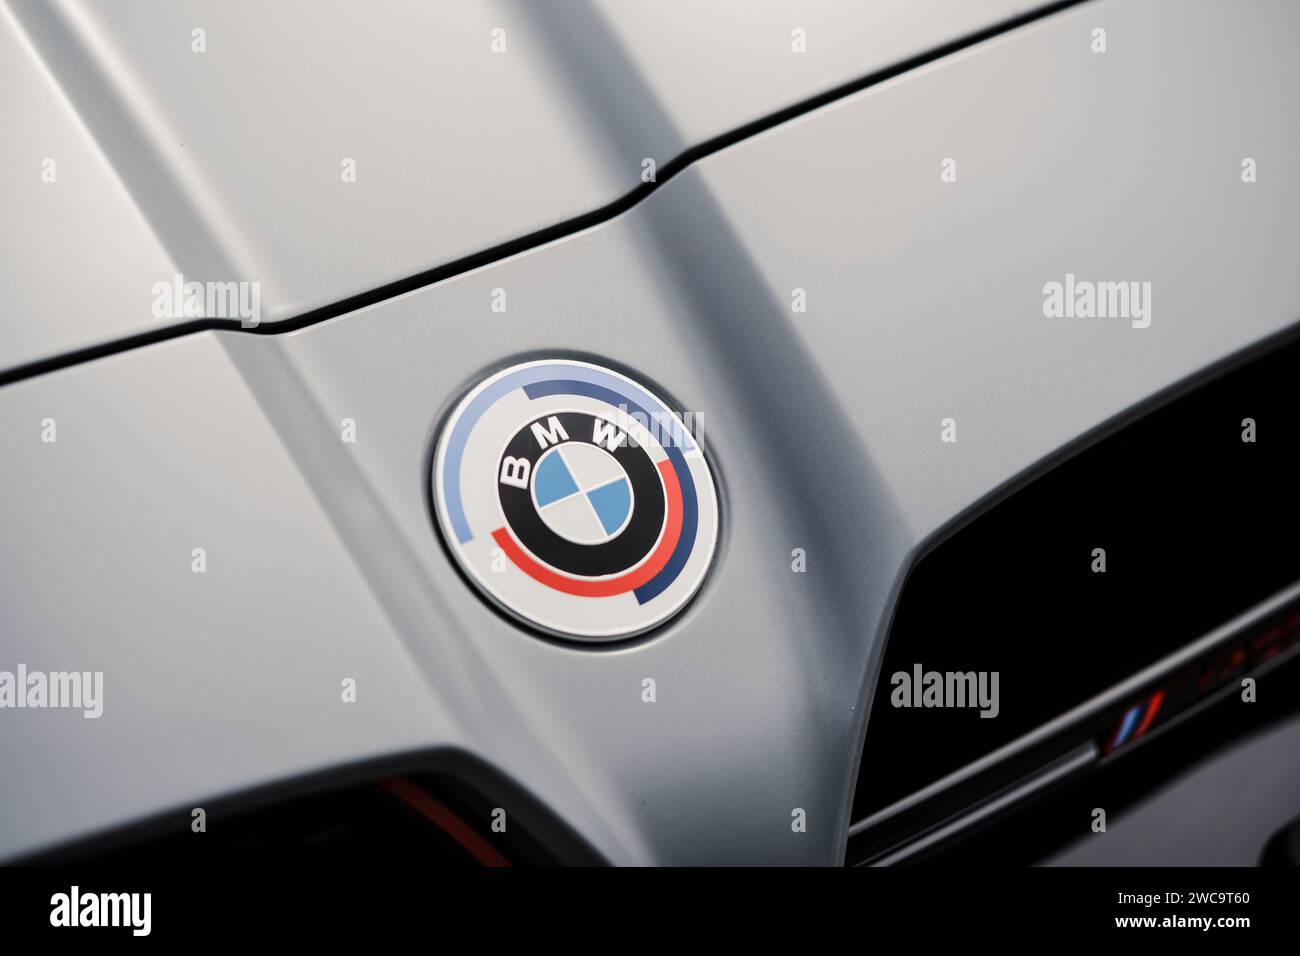 2022's BMW M cars will get special motorsport roundels